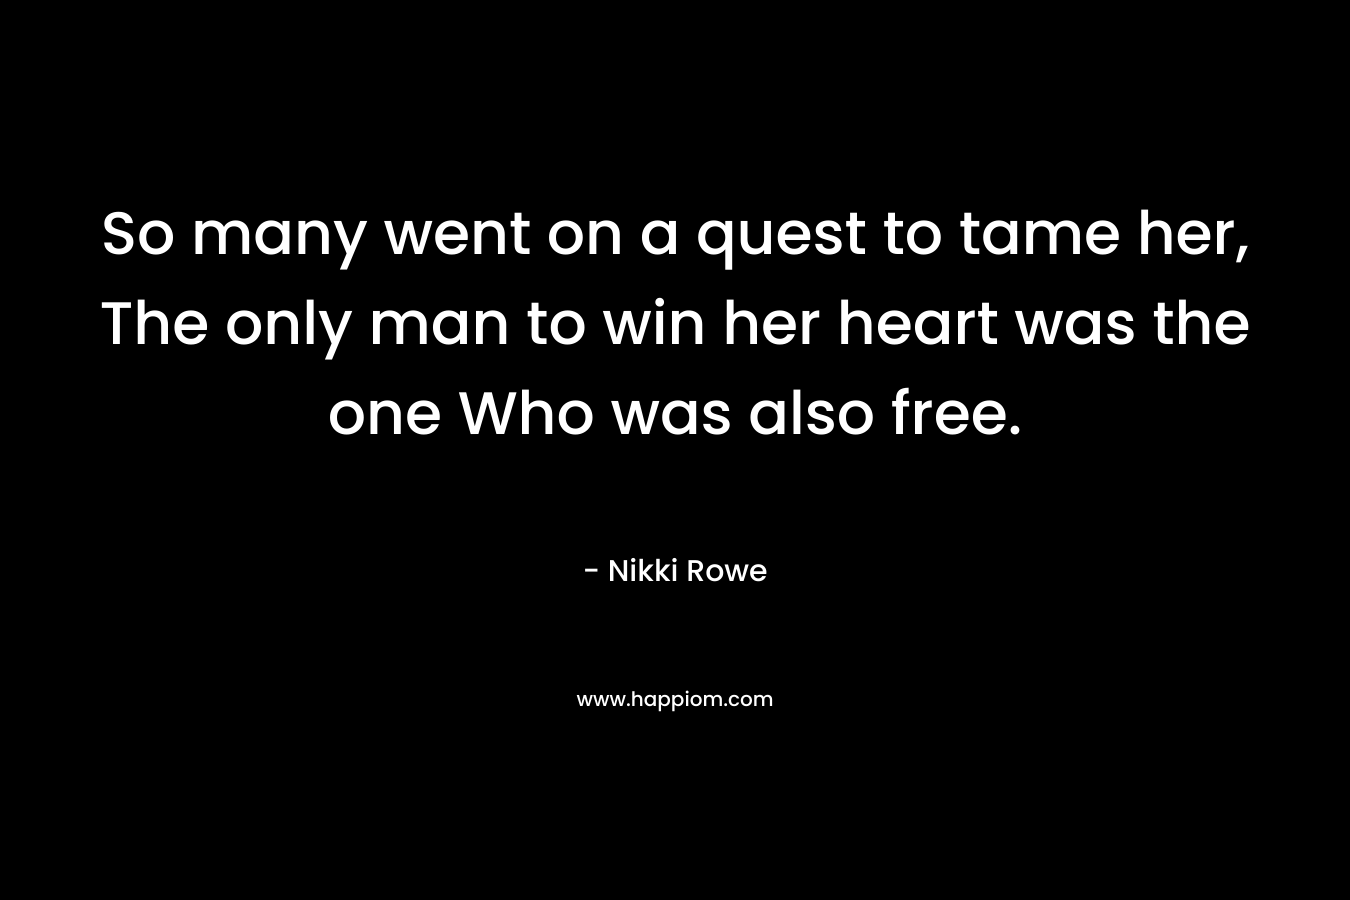 So many went on a quest to tame her, The only man to win her heart was the one Who was also free.